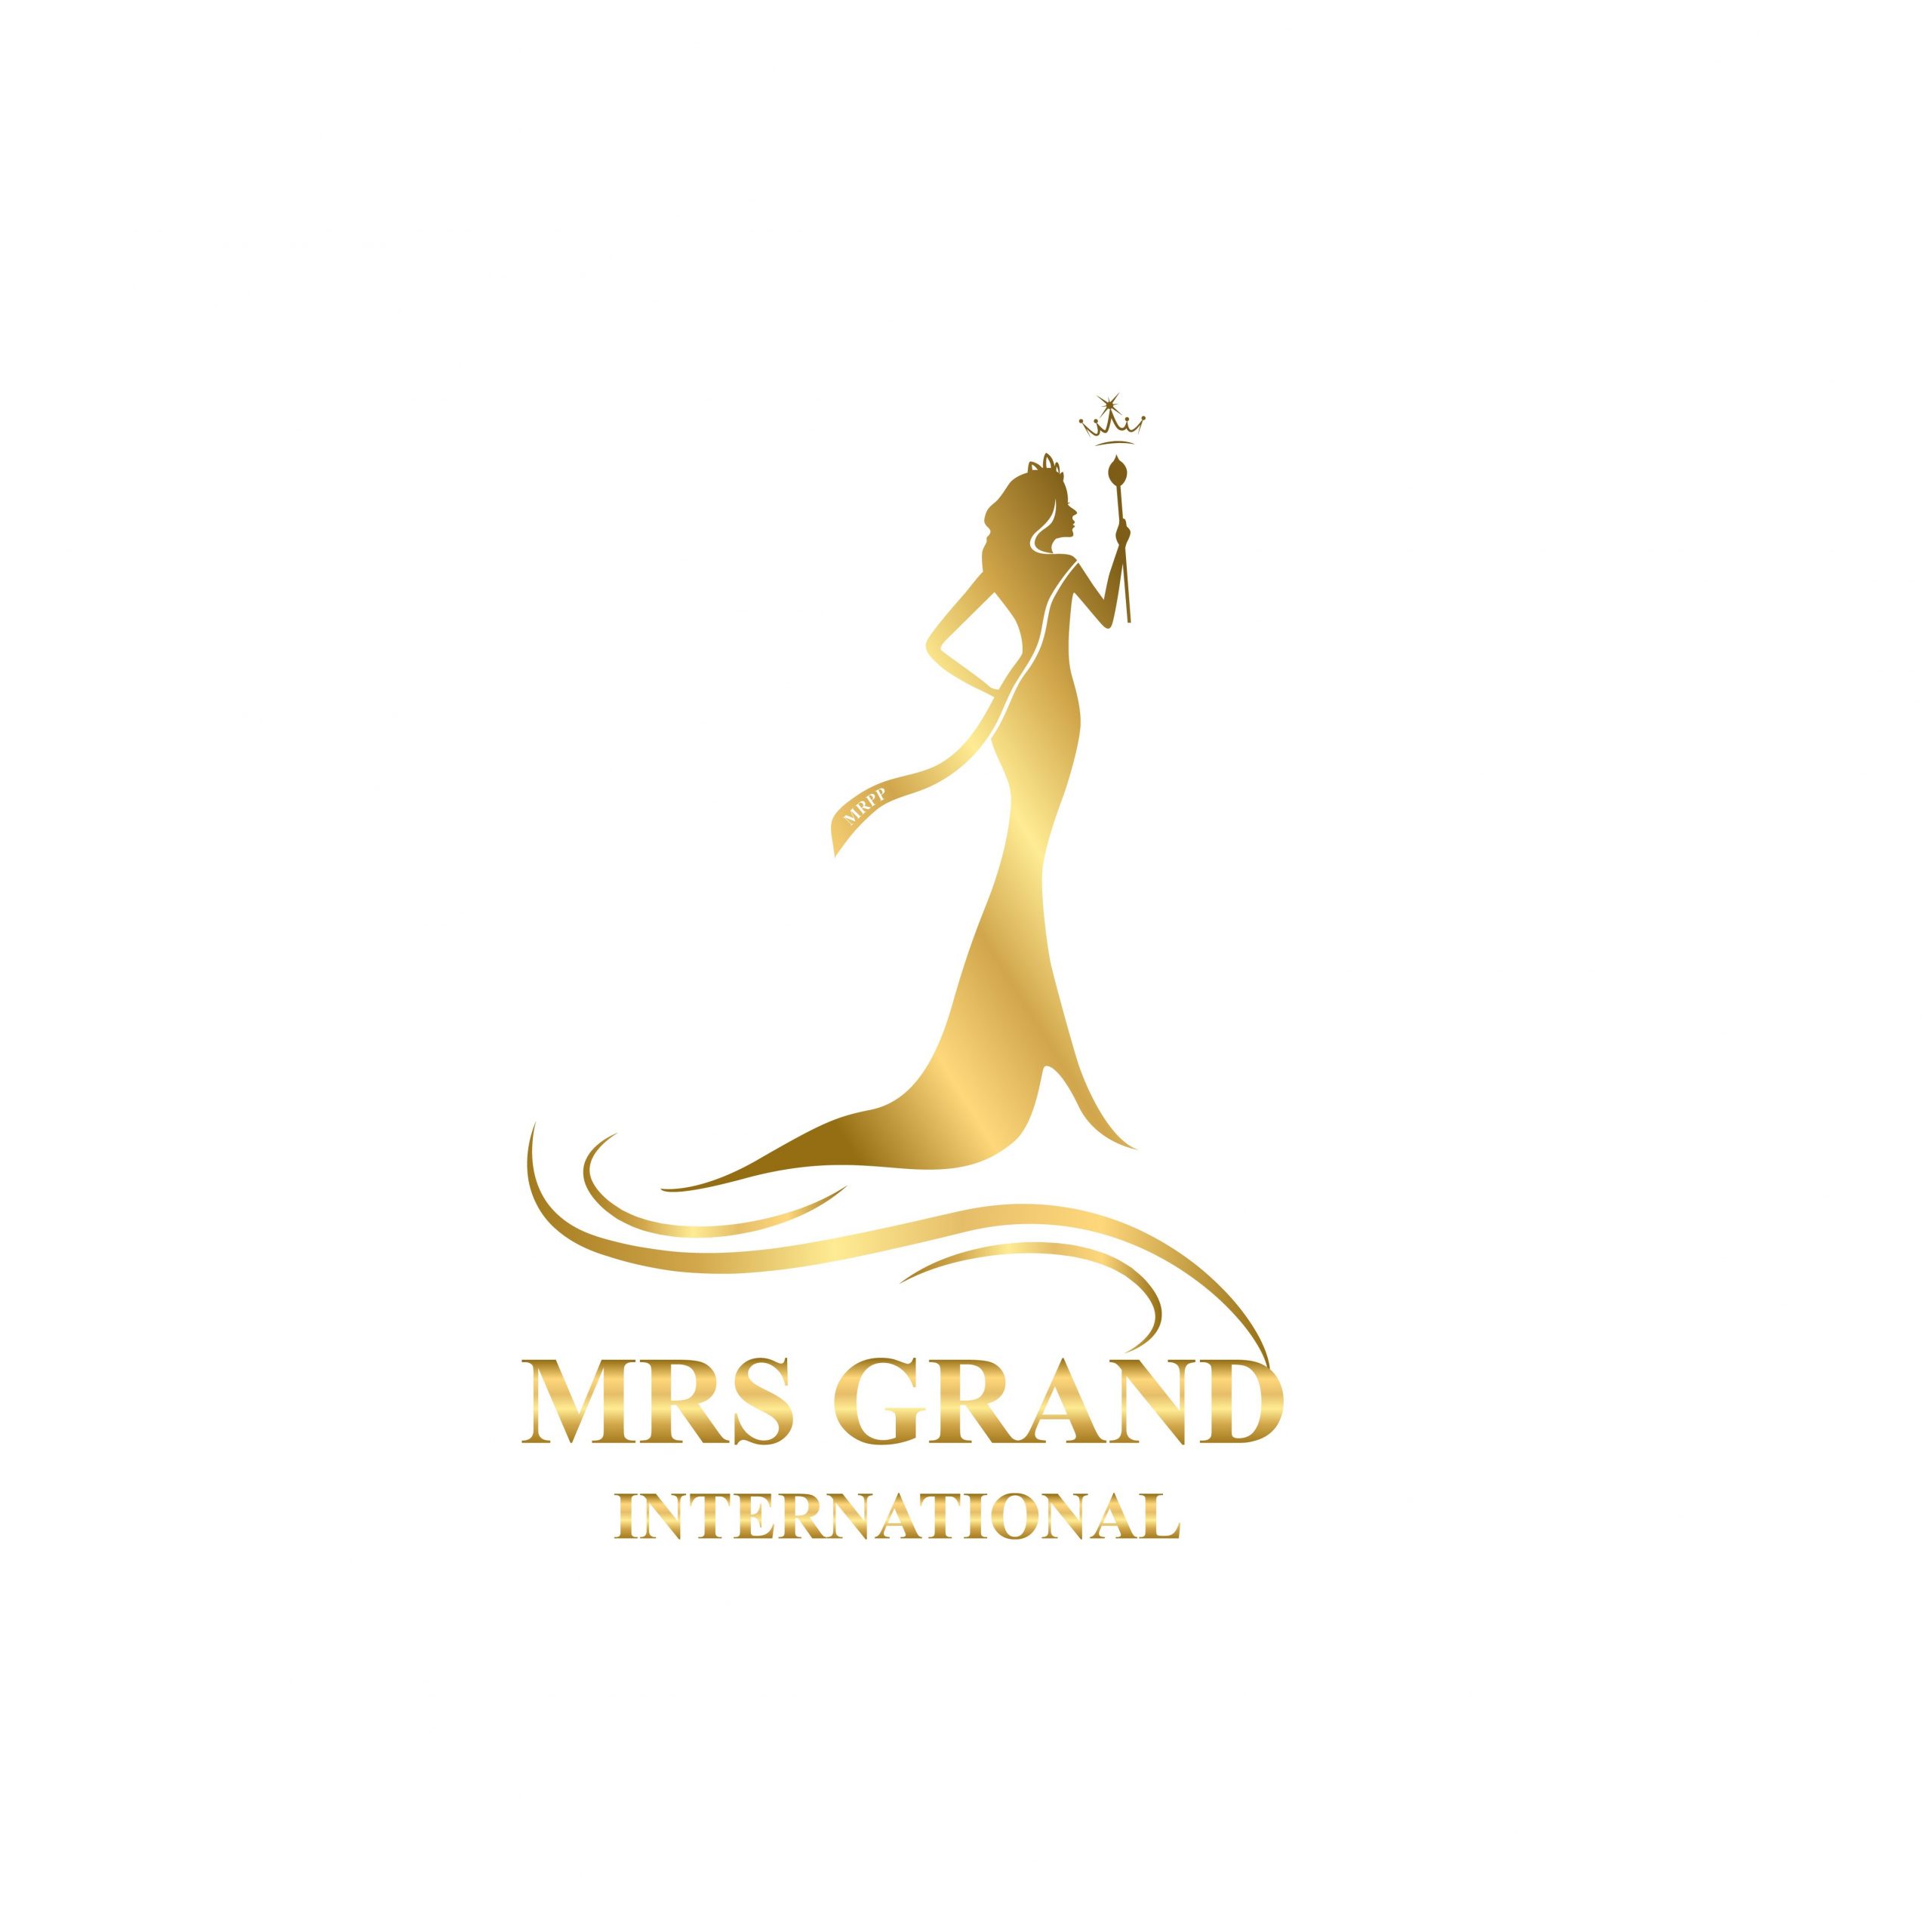 Meet the founder of Mrs Grand International pageant